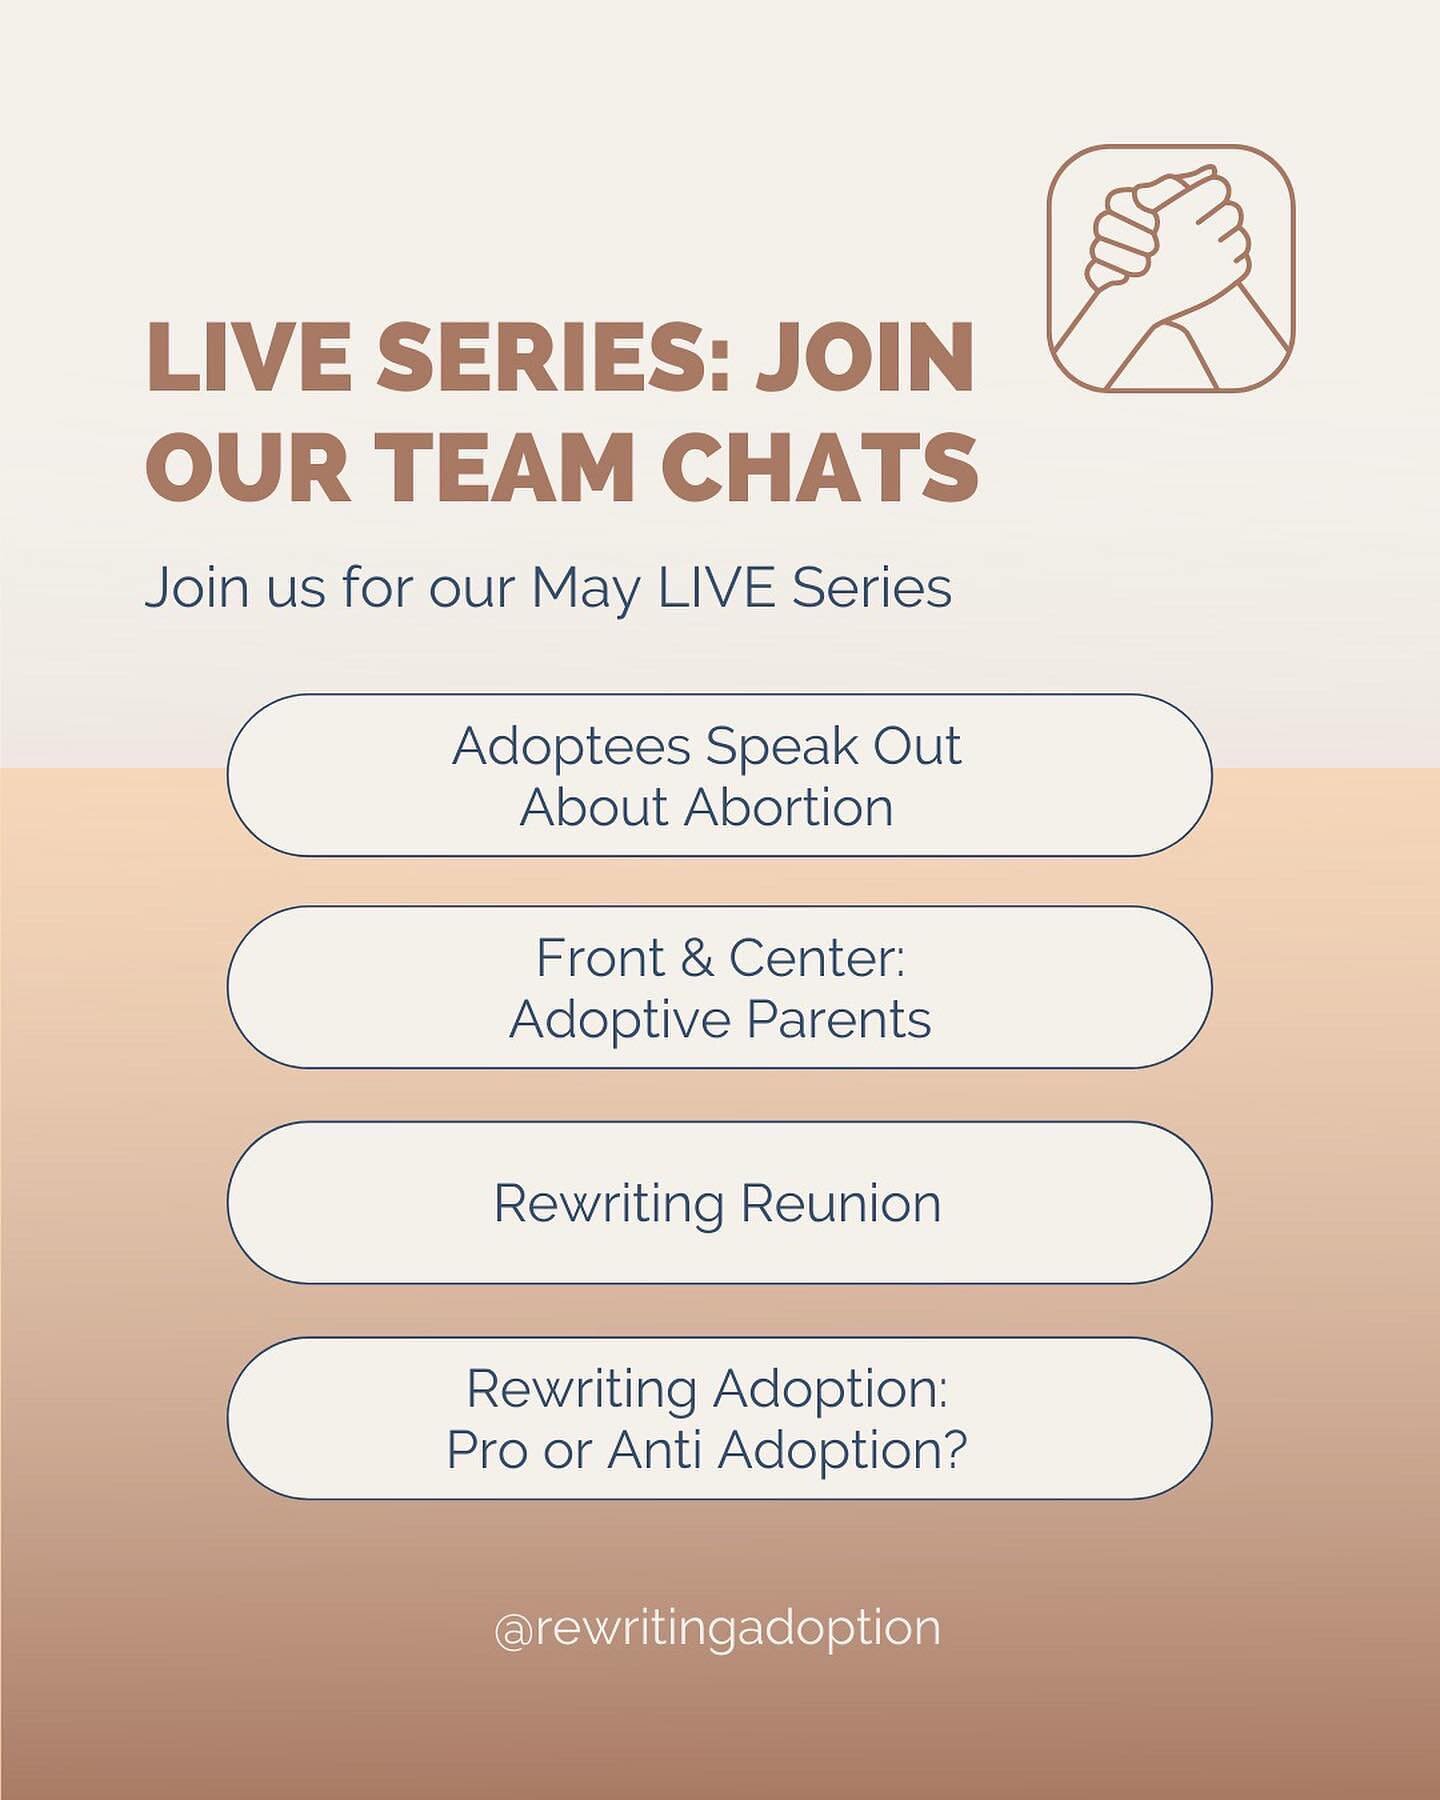 We hope you can join us this month! Swipe ➡️ for dates and join us live!

Lately our team meetings have turned into chats about our views and experiences regarding adoption topics, so we wanted to share what we&rsquo;ve been discussing.

Join us this